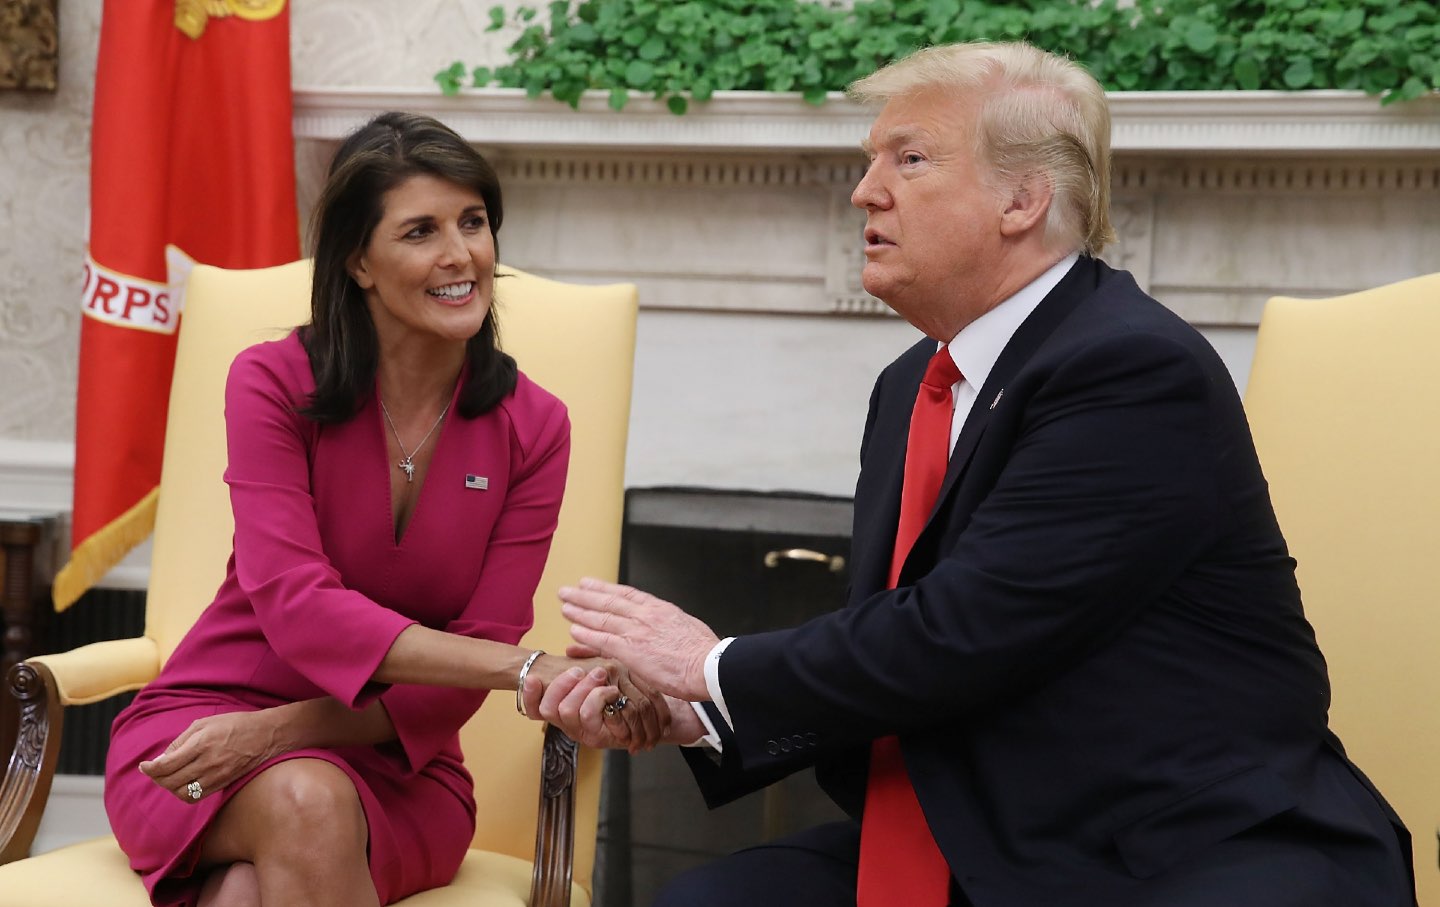 Donald Trump and Nikki Haley, oval office 2018